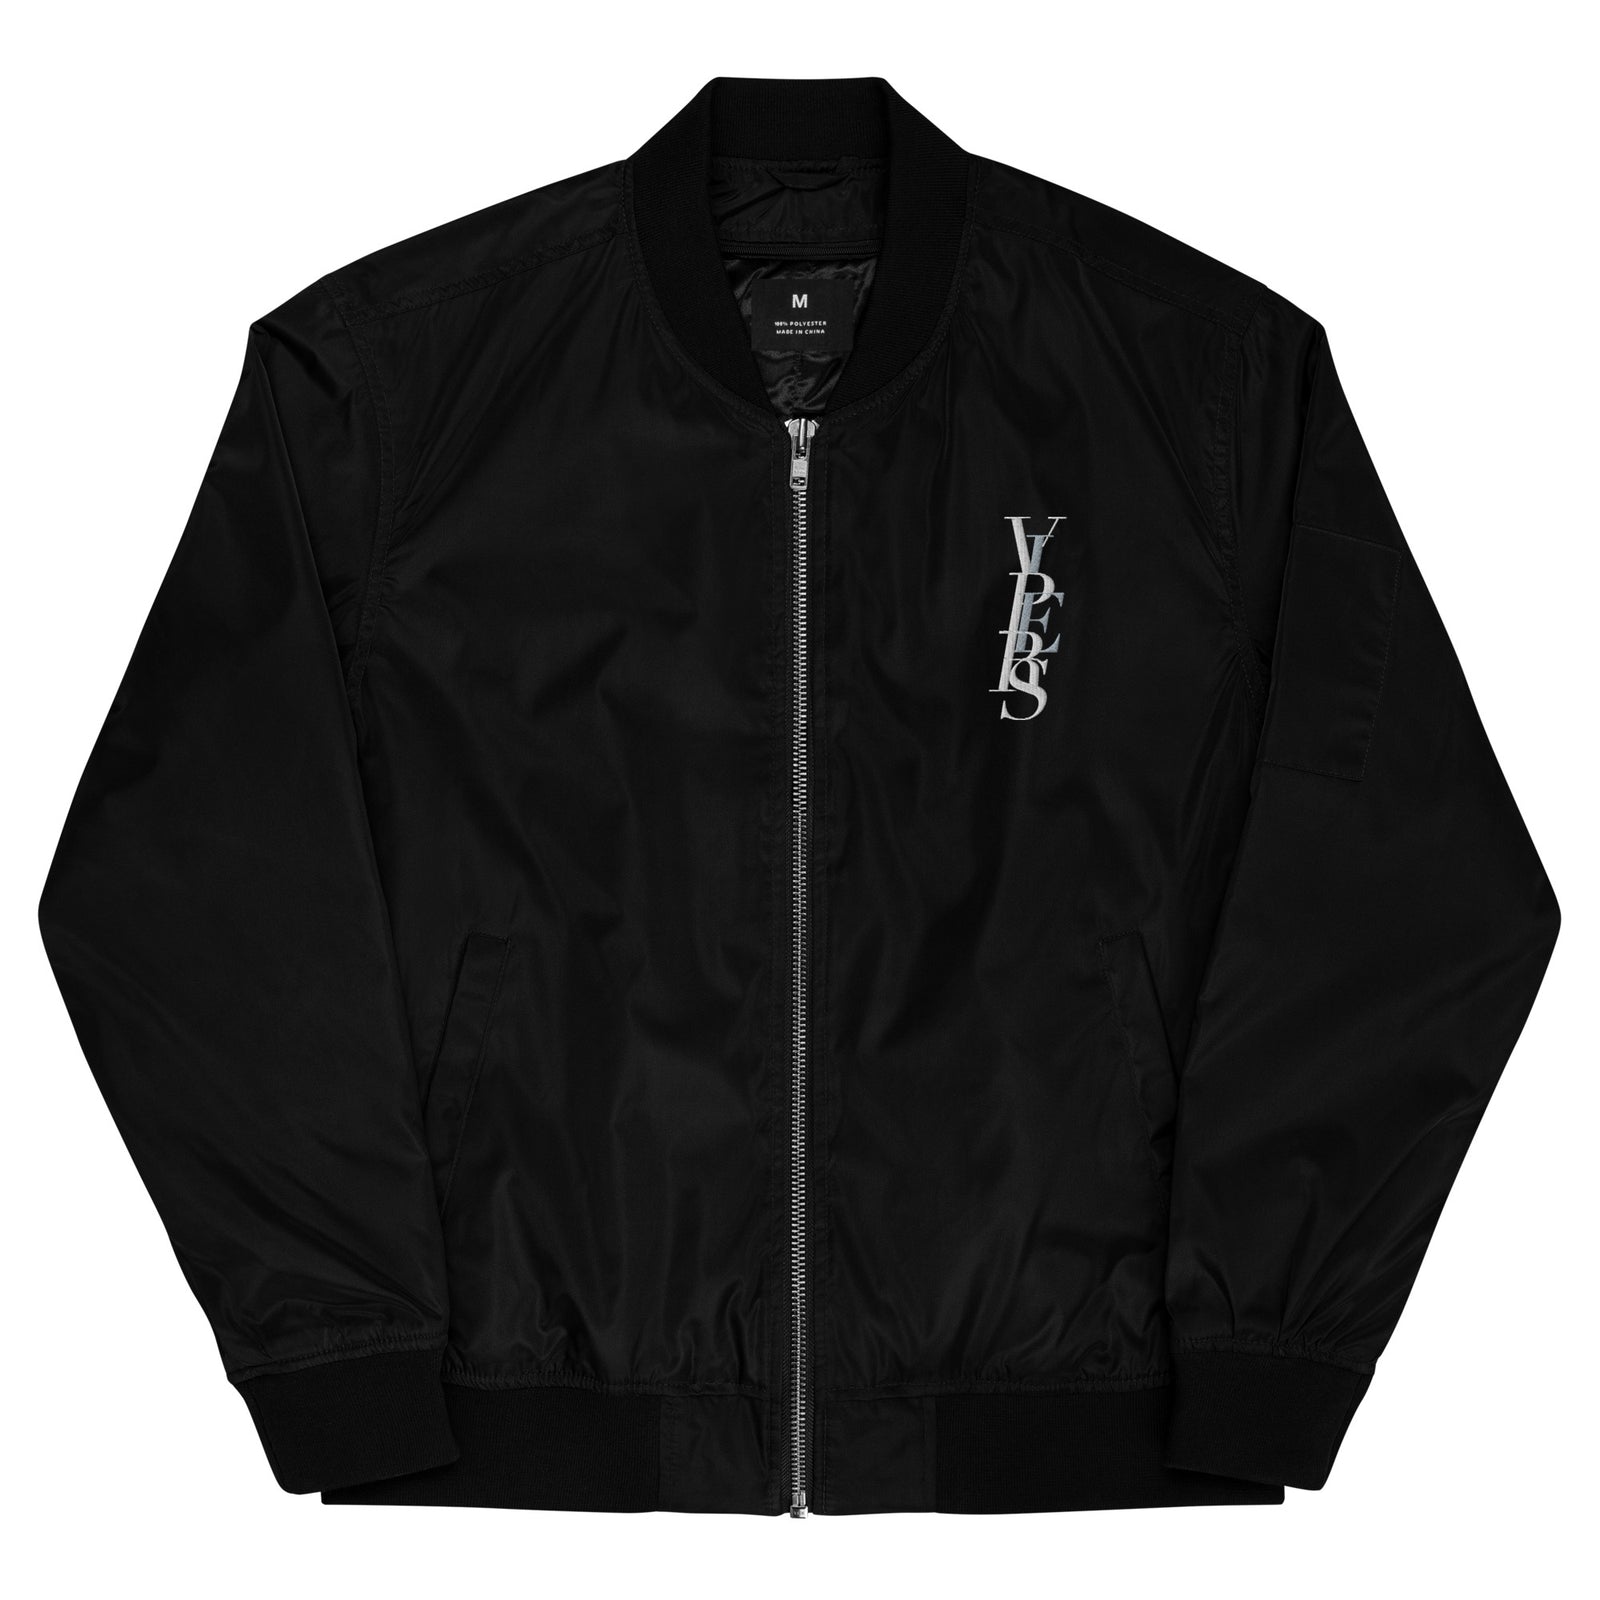 Vipers Code Premium Recycled Bomber Jacket